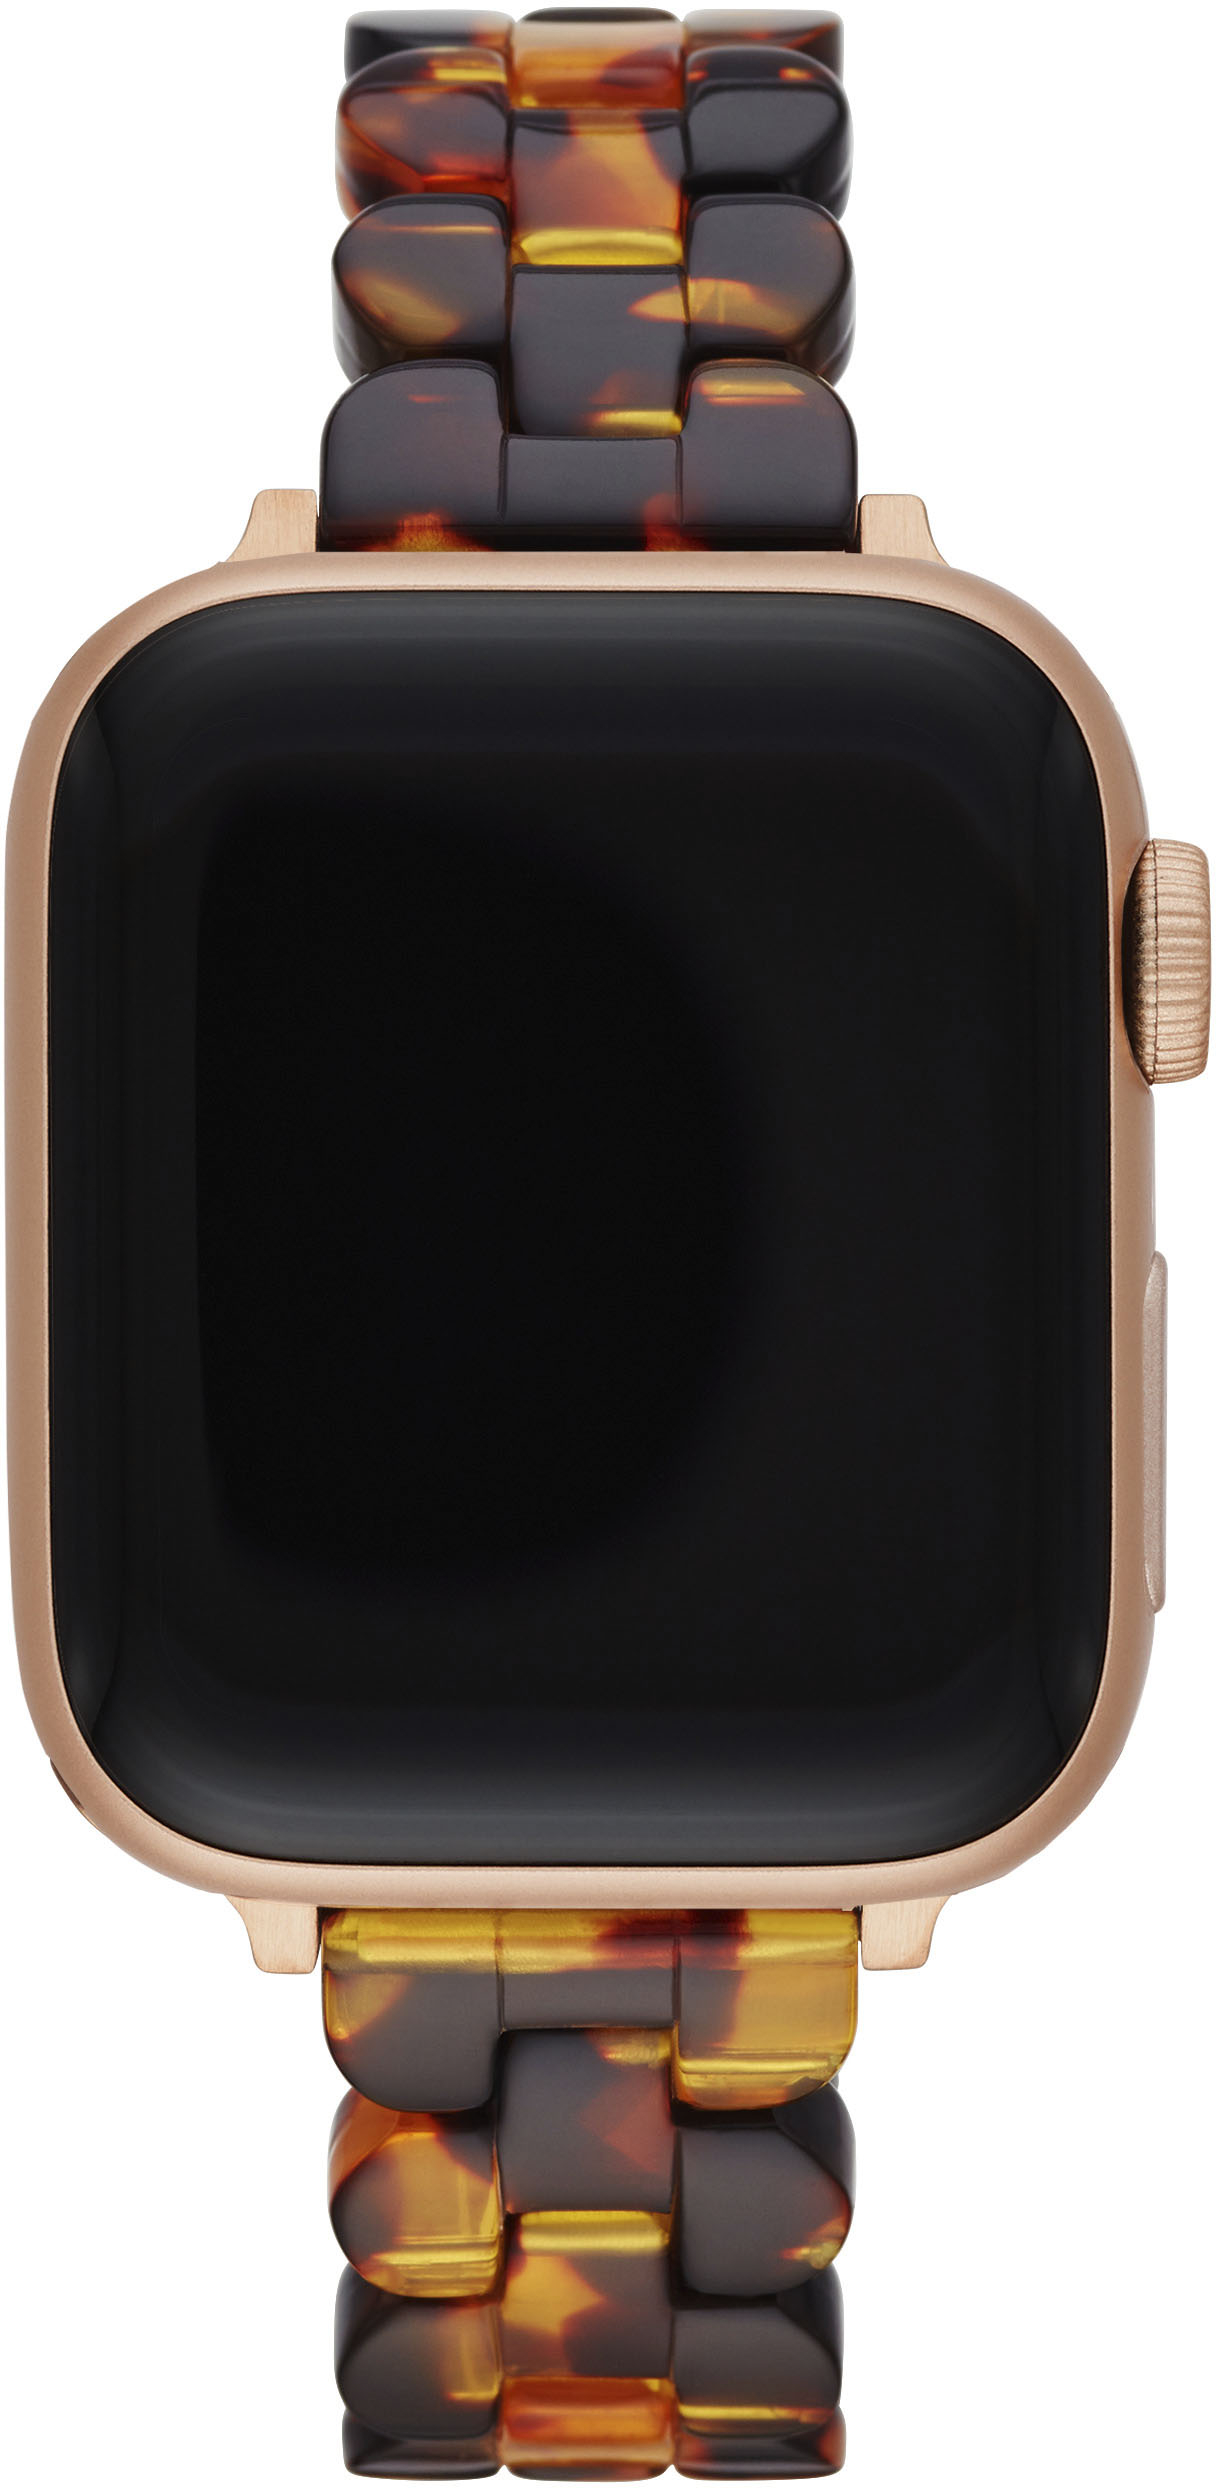 Angle View: Kate Spade New York Scallop Tortoise Acetate 38/40mm Bracelet for Apple Watch® - Tortoise